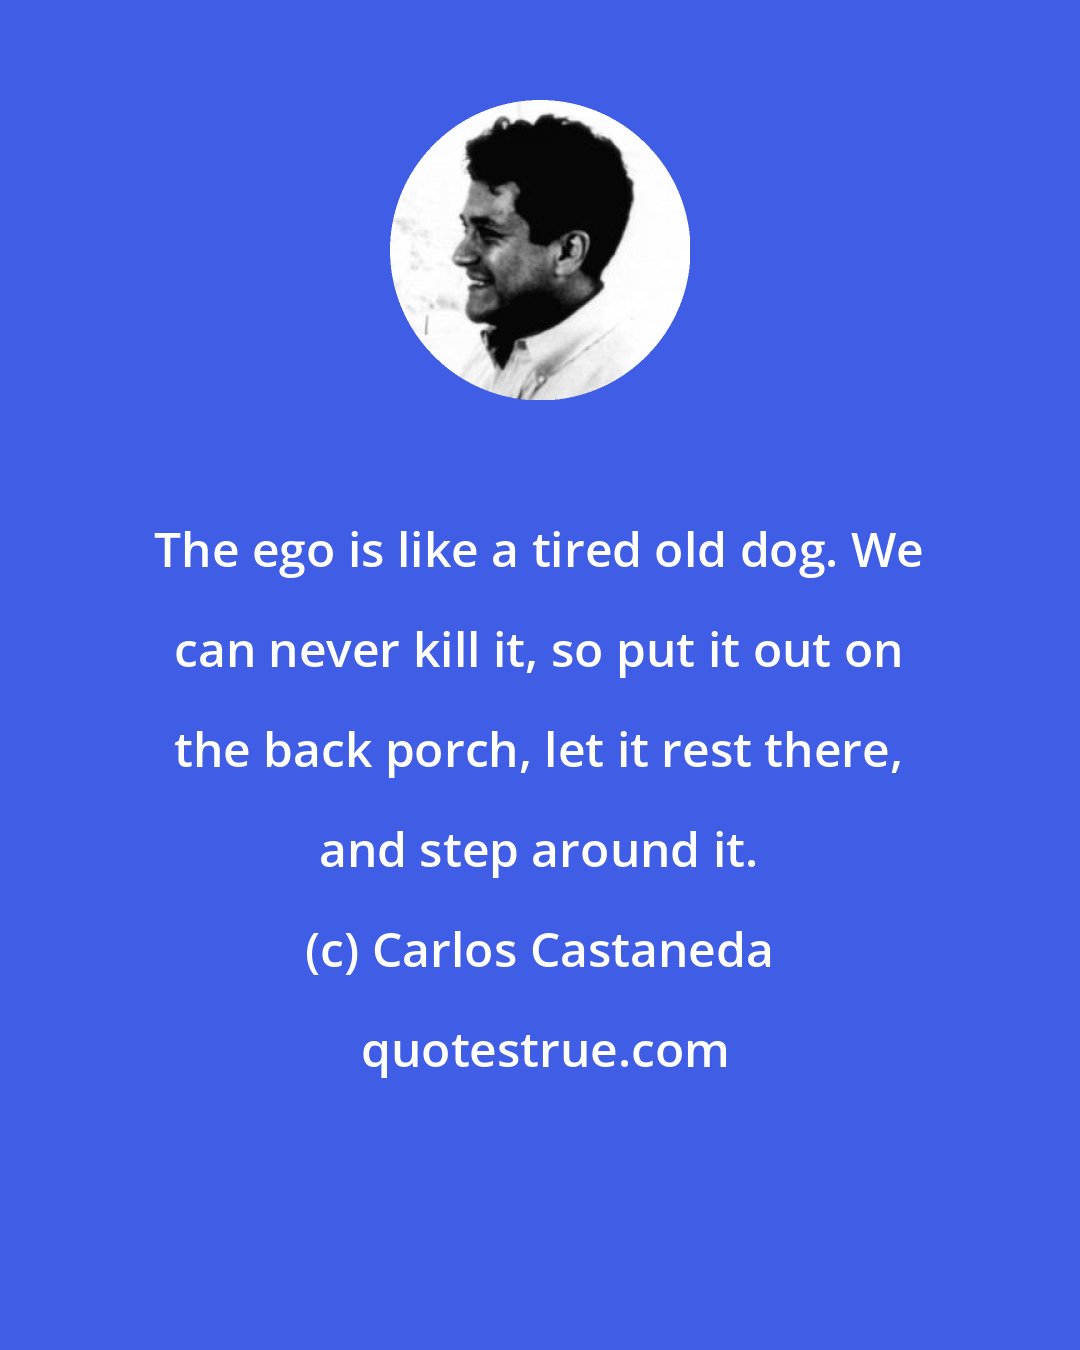 Carlos Castaneda: The ego is like a tired old dog. We can never kill it, so put it out on the back porch, let it rest there, and step around it.